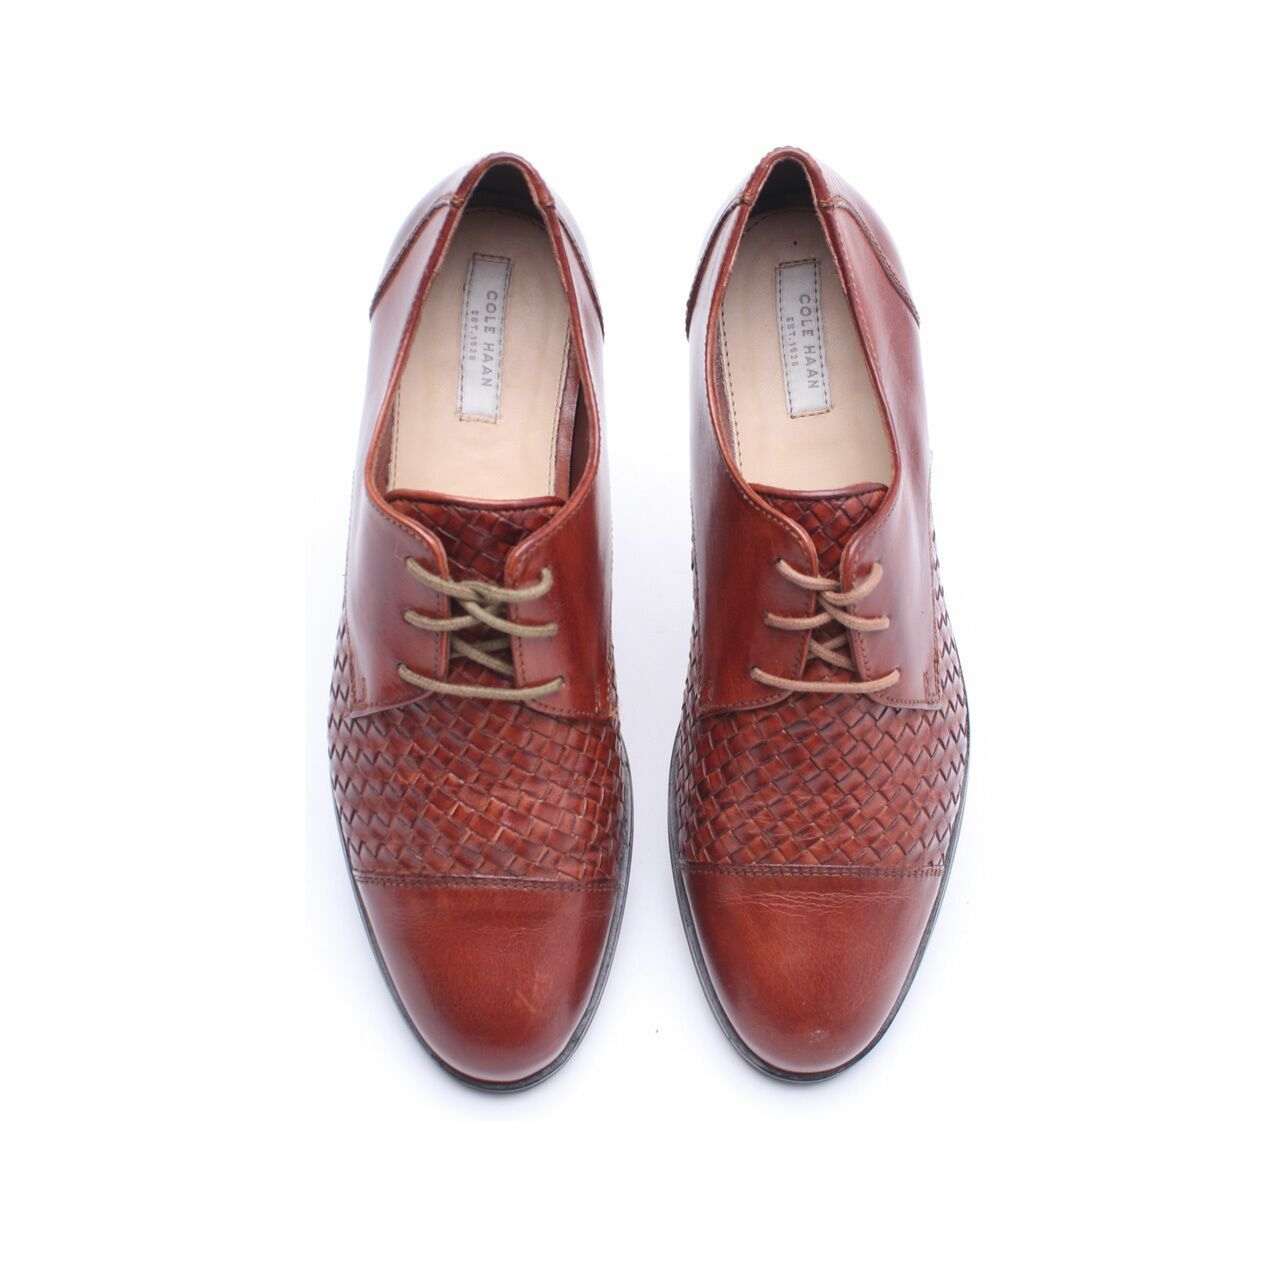 Cole Haan Brown Intrecciato Leather Flats